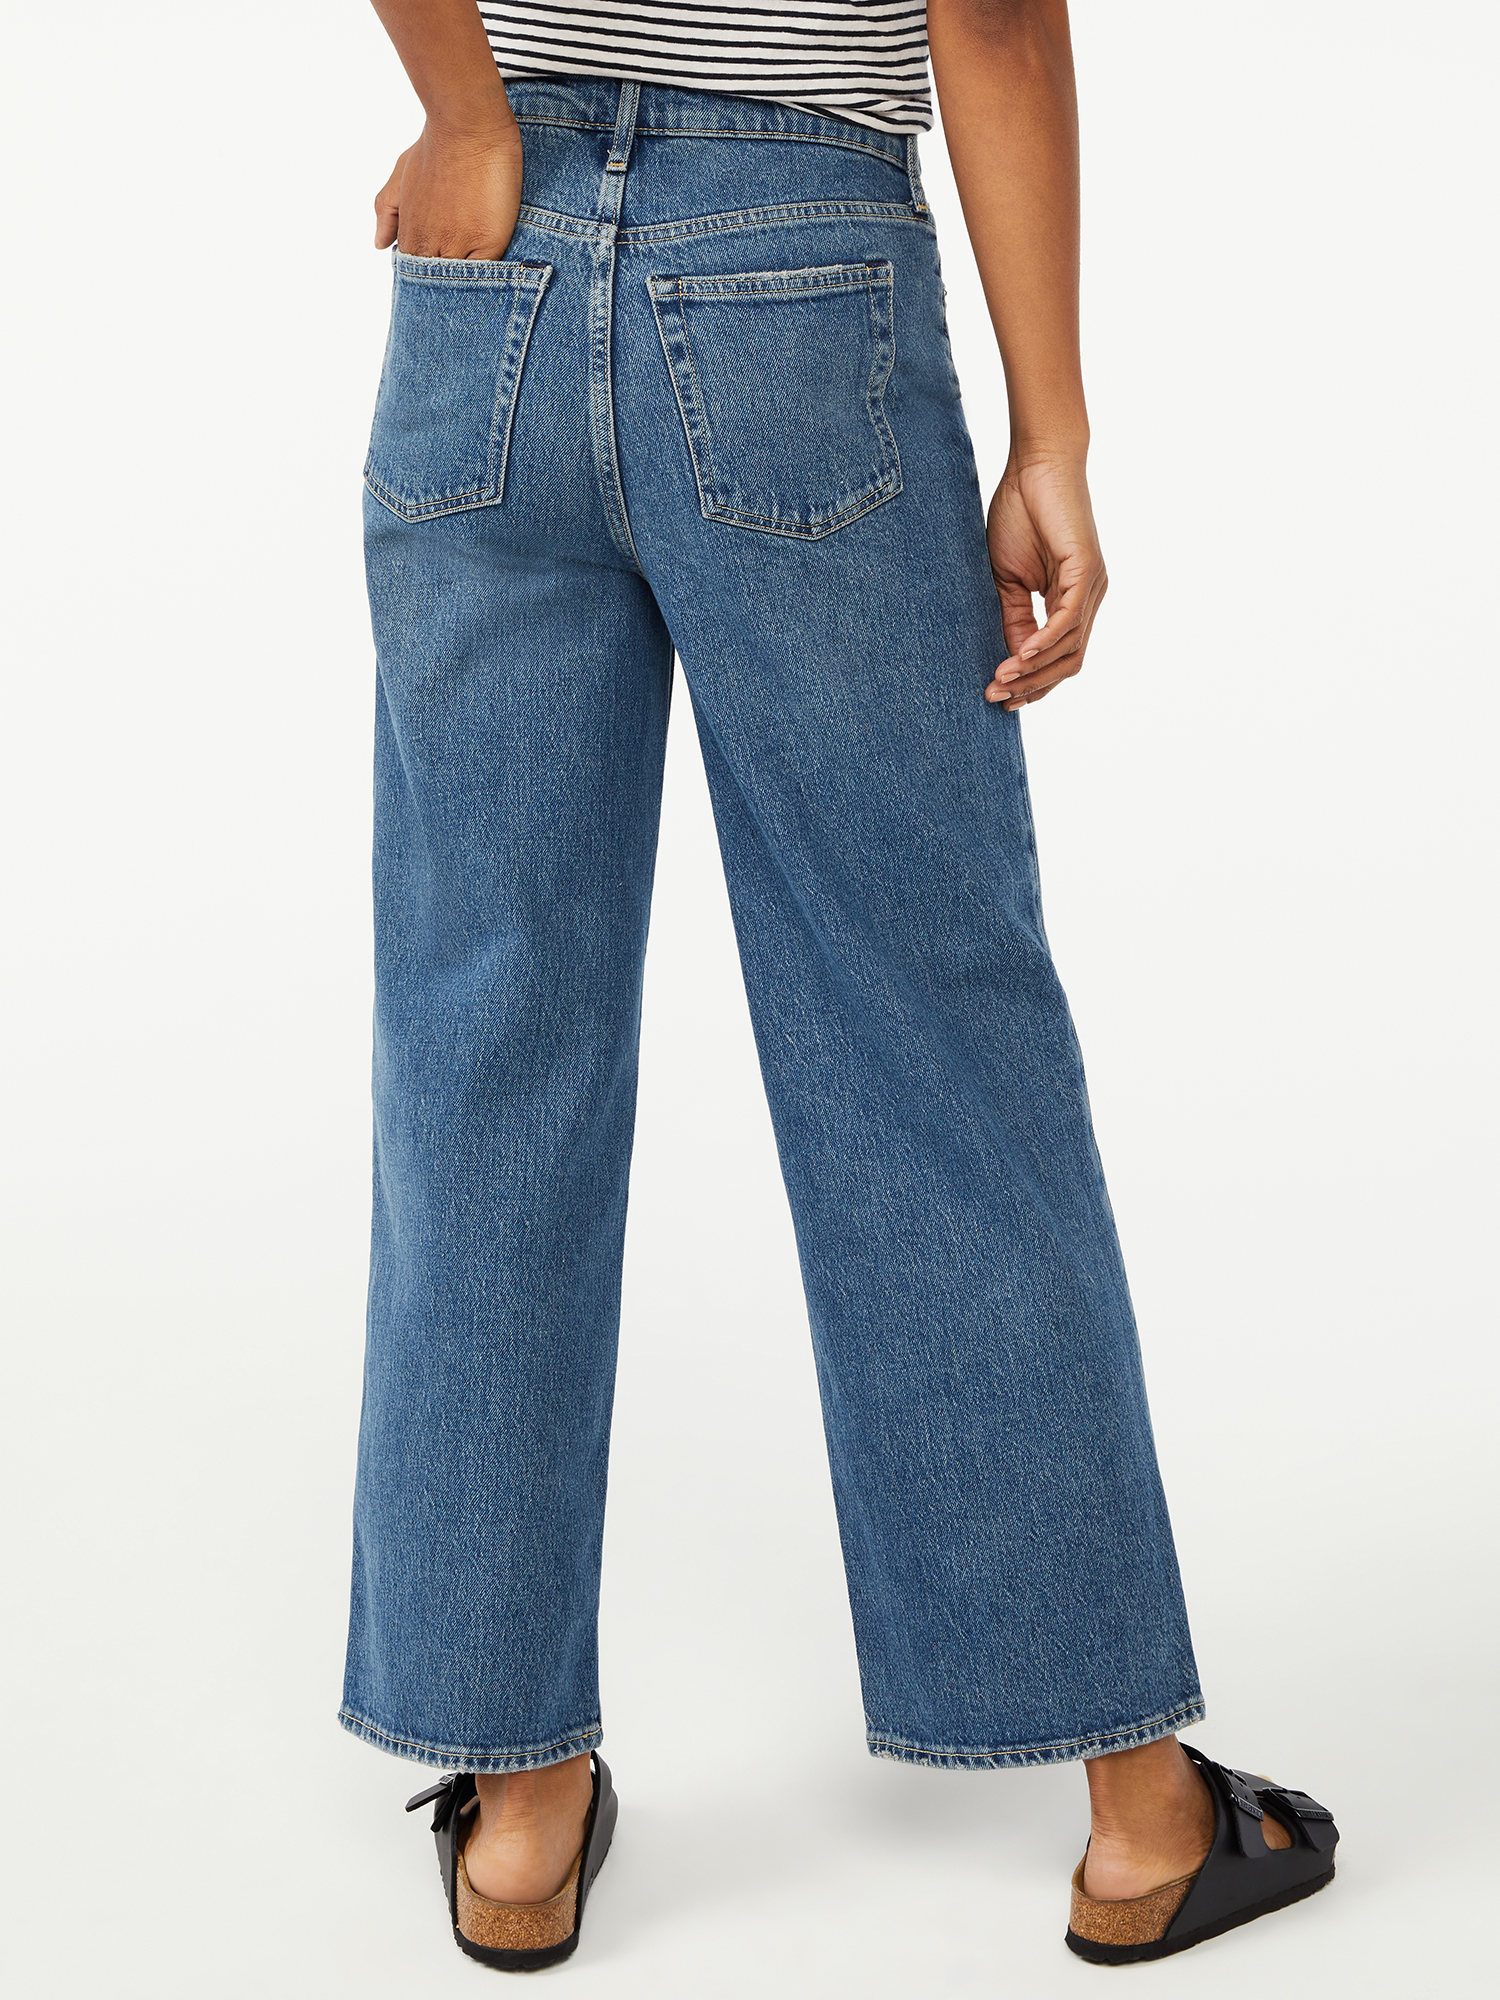 Free Assembly Women's Cropped Wide High Rise Straight Jeans - image 2 of 5